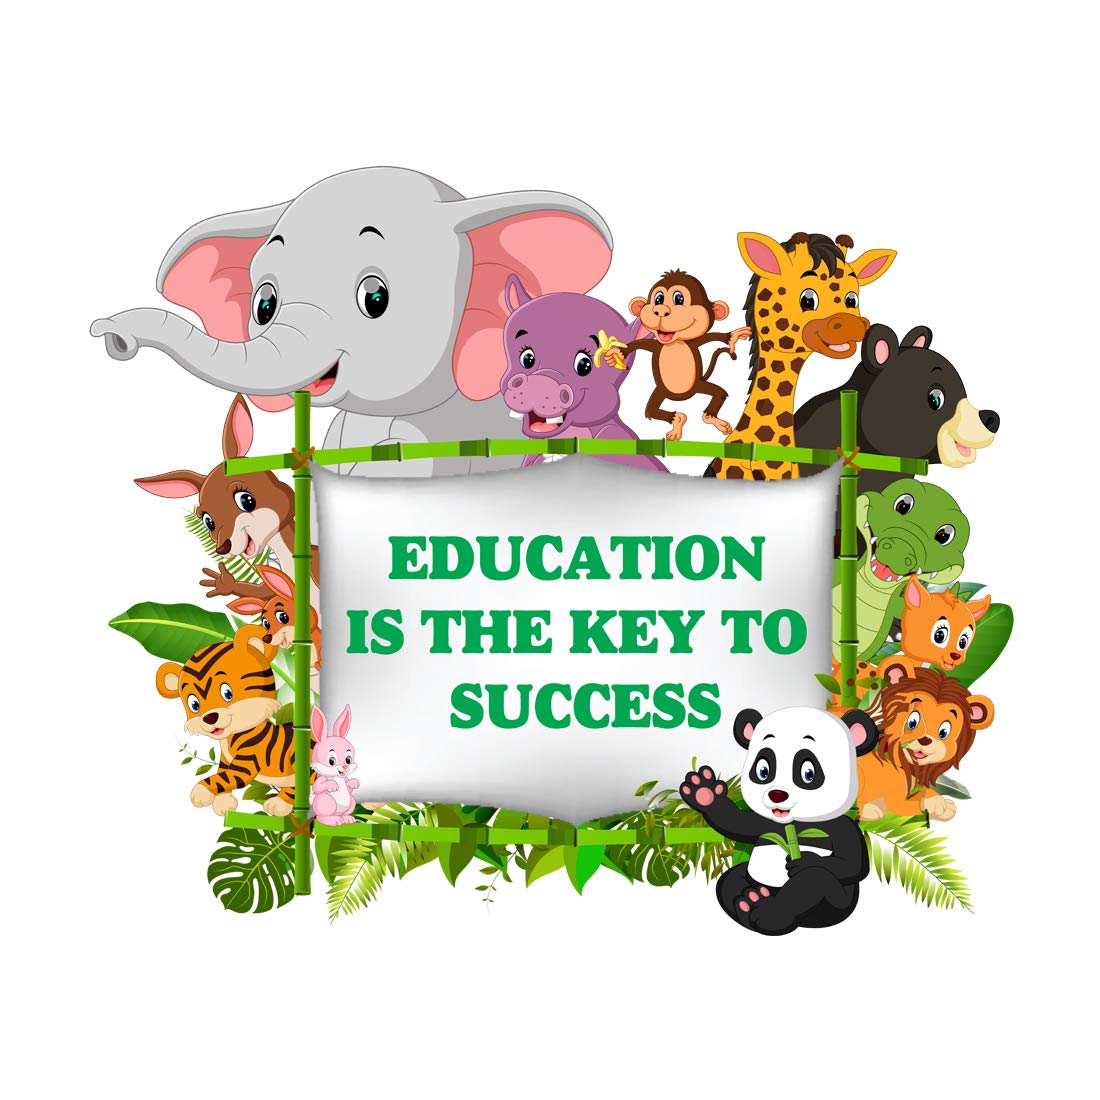 Education is the key to success wall sticker-Wall Sticker for Classroom-Wall Sticker for School-Stumbit Education